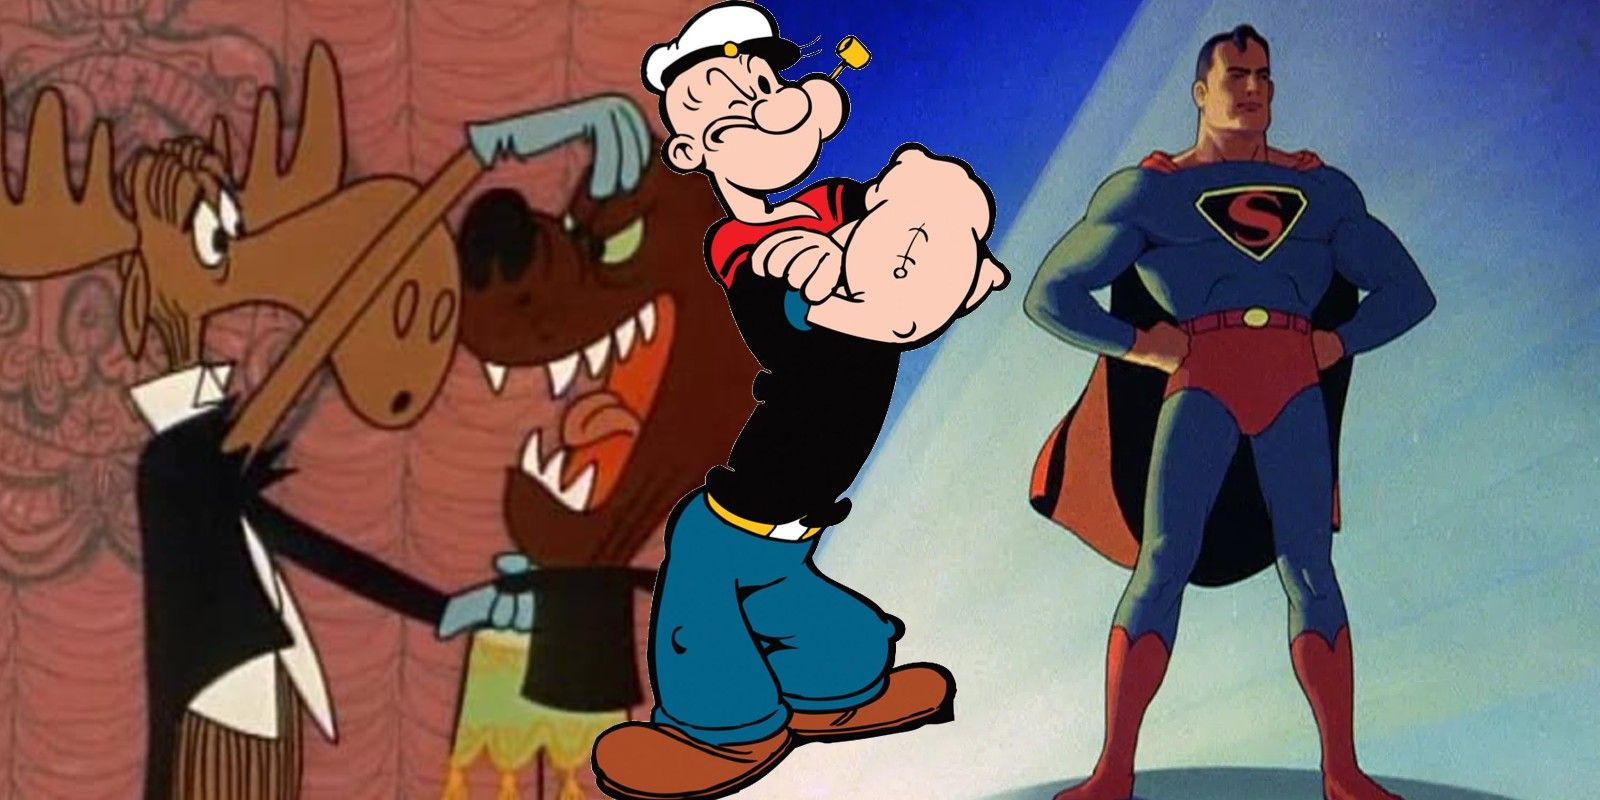 Bullwinkle J Moose, Popeye, and Superman Who Framed Roger Rabbit Cut Cameos